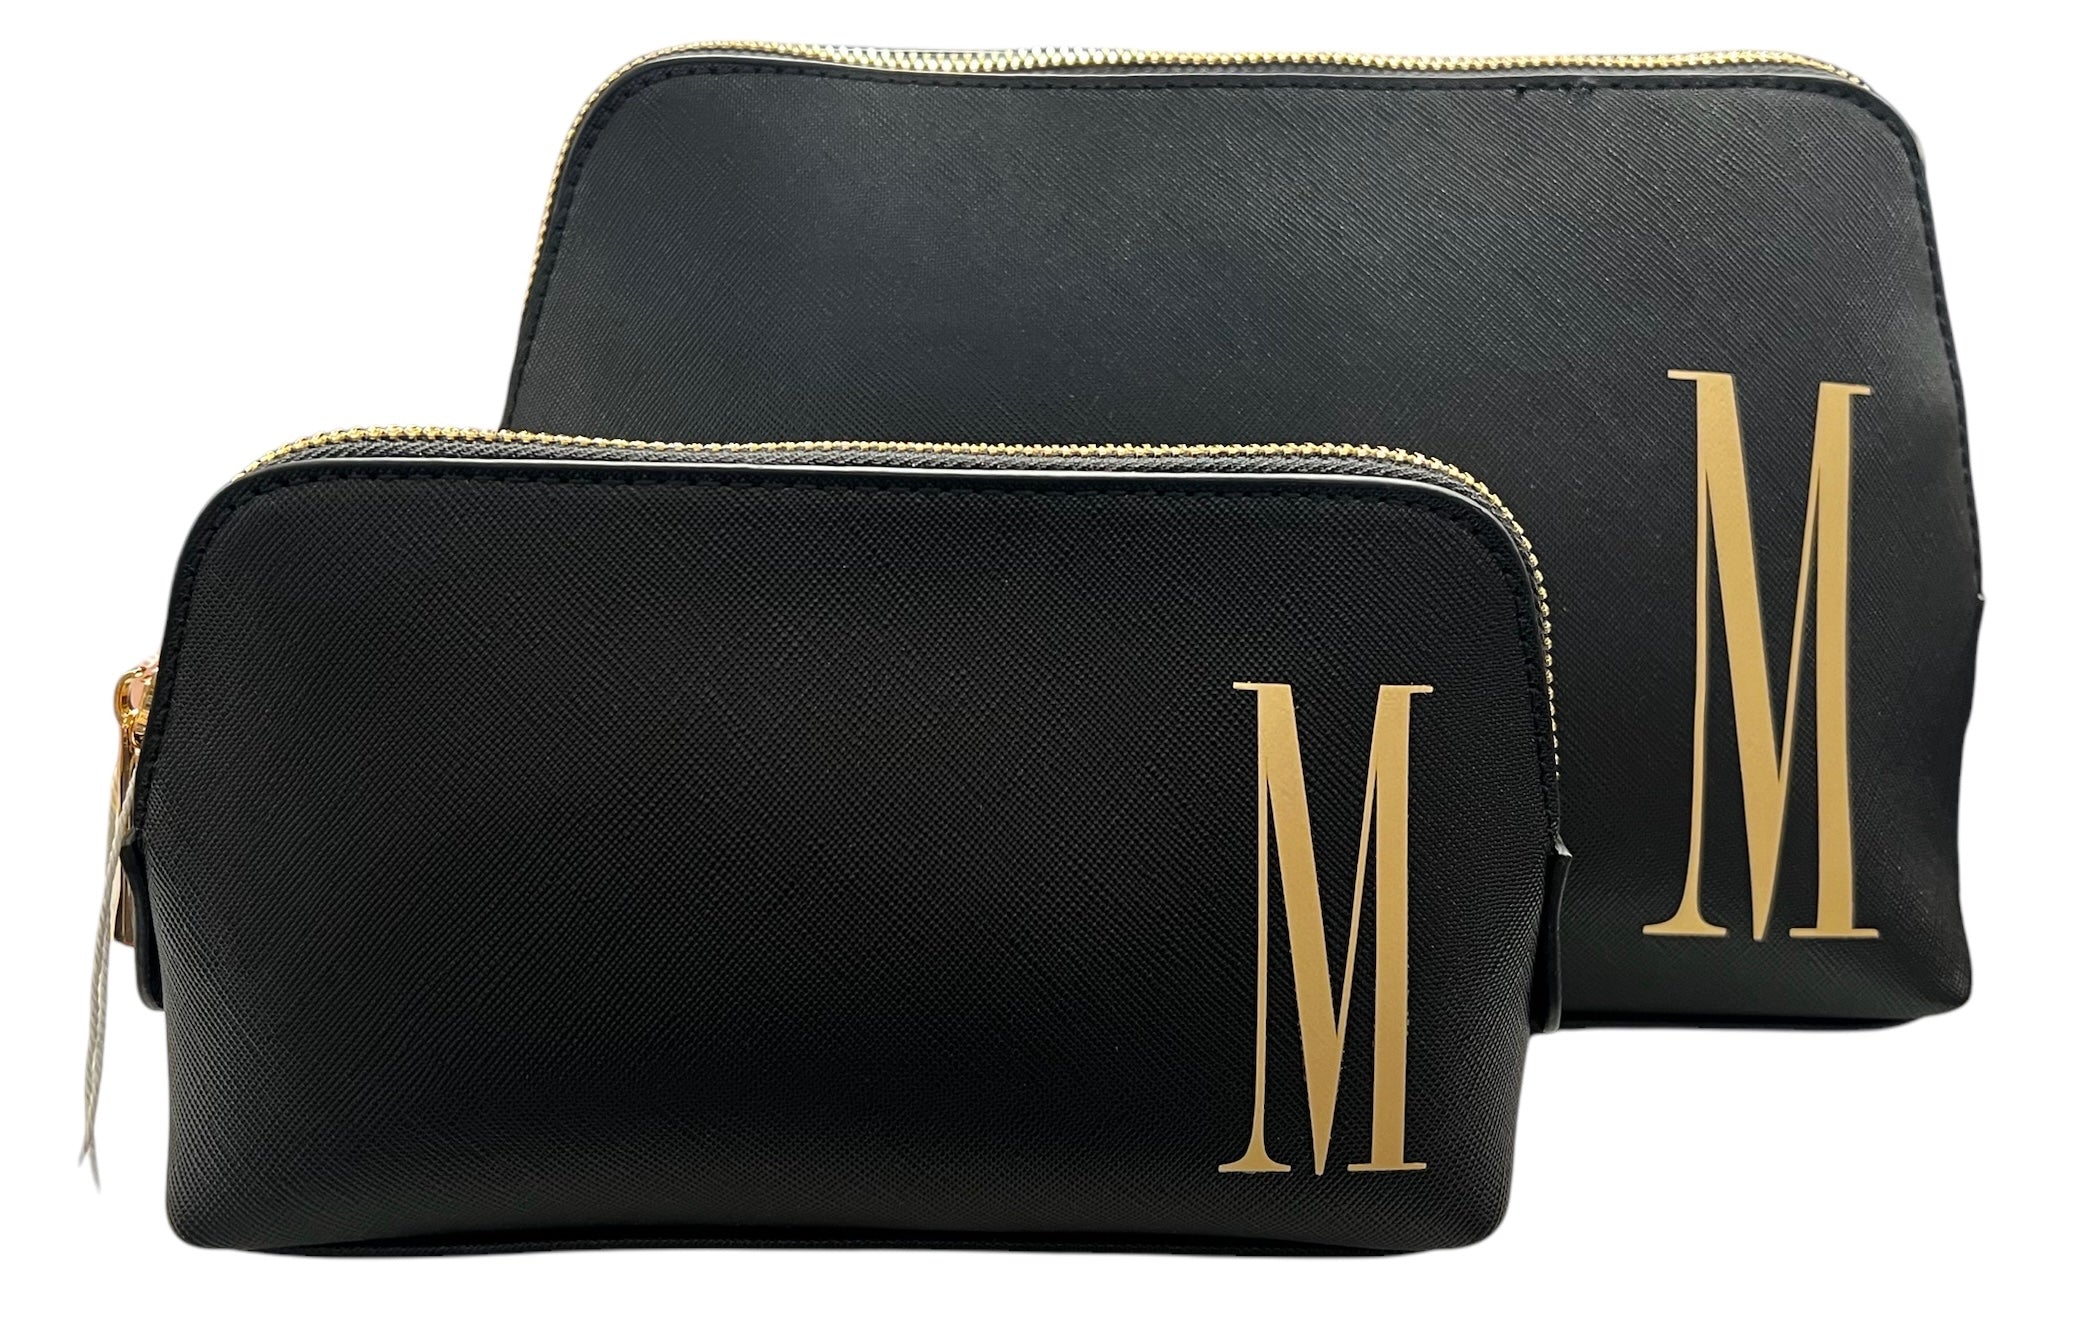 Initialed Large Cosmetic Bag  -Black